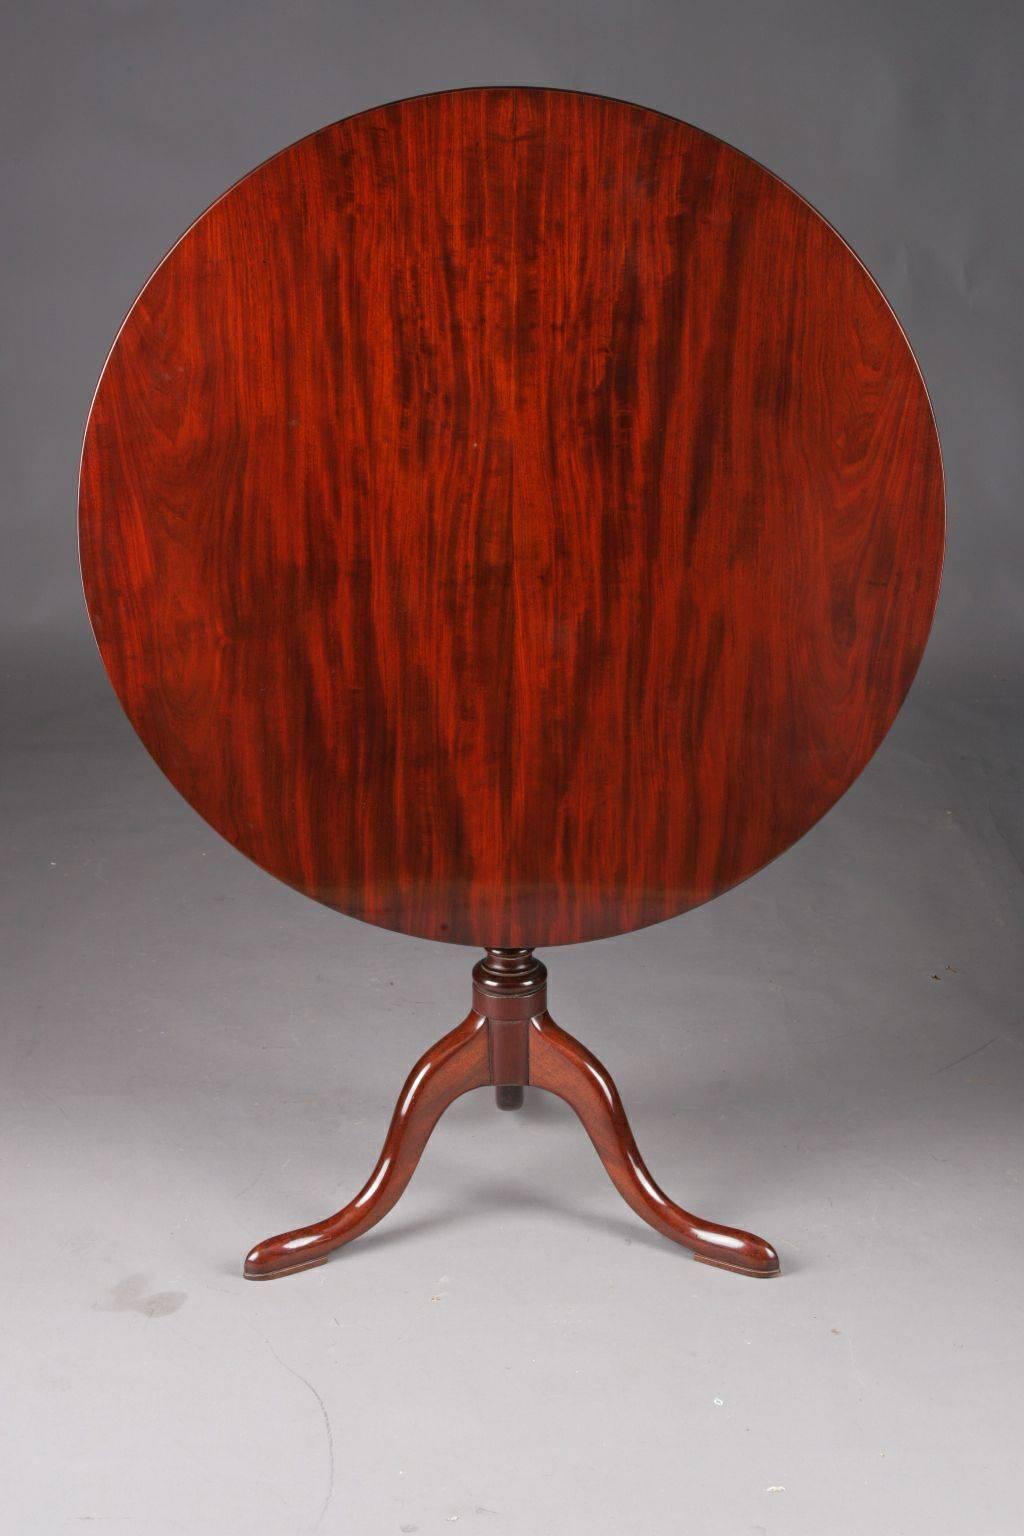 Rare original English Regency folding table or tripod table 18th-19th century.
Through and through massive mahogany. Slim ballroom shank, of which extending three curving legs in so-called pillow-feet. Two straight bars as support for round folding